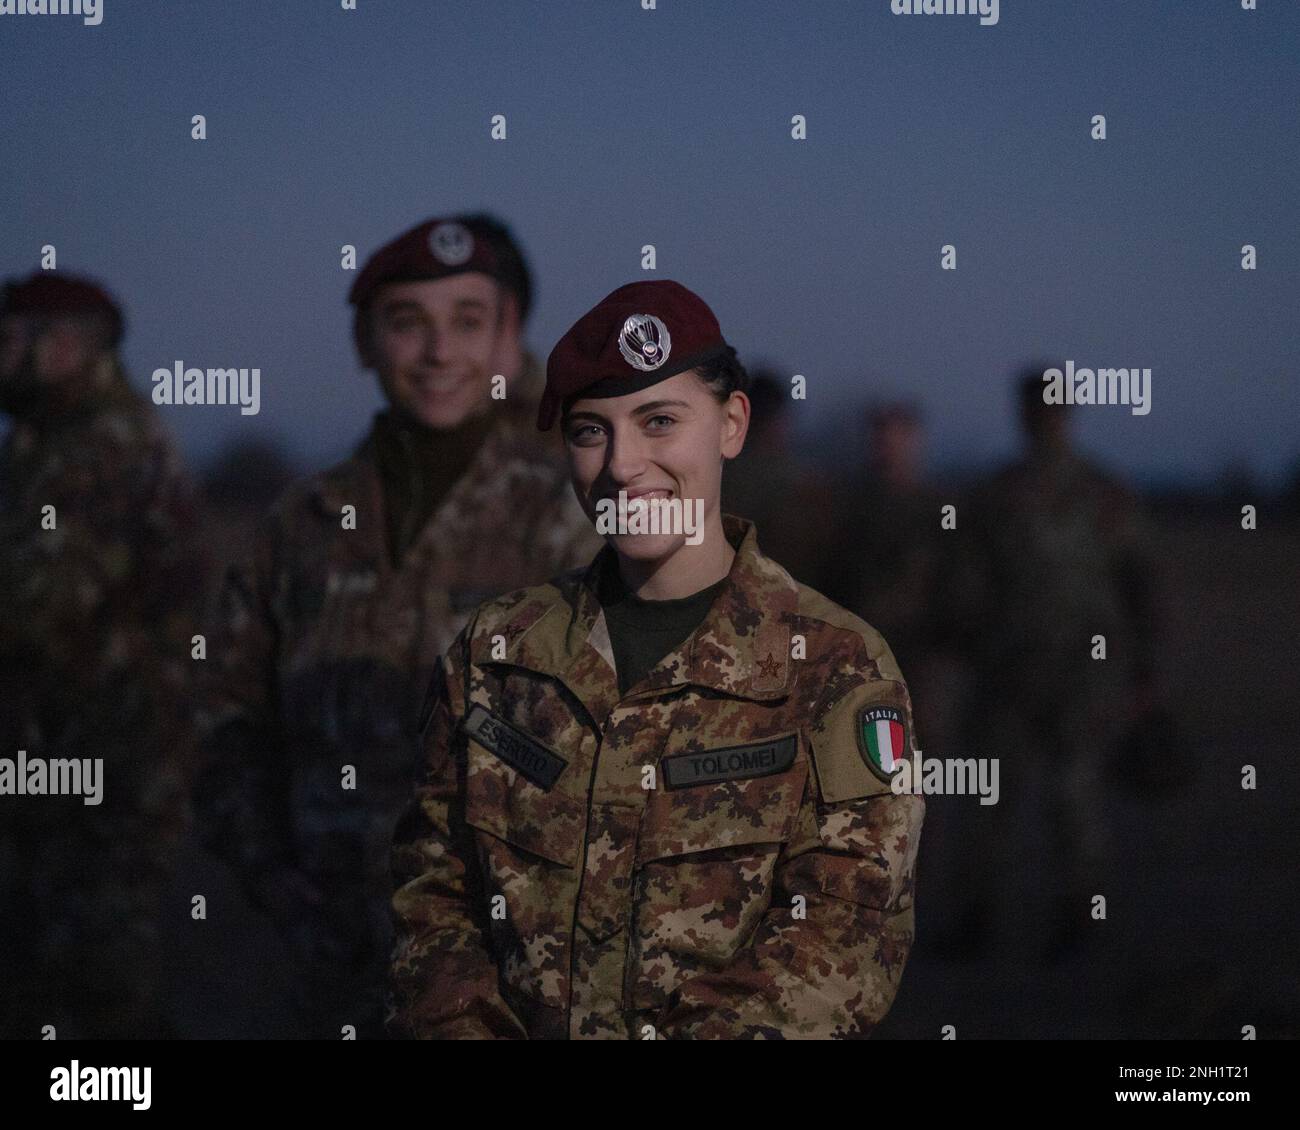 An Italian Army paratrooper with the Brigata Paracadutisti 'Folgore' shows excitement upon receiving her American Parachutist Badge after conducting an airborne operation alongside U.S. Army paratroopers assigned to the 173rd Airborne Brigade at Frida Drop Zone in Pordenone, Italy, Dec. 7, 2022.     The 173rd Airborne Brigade is the U.S. Army's Contingency Response Force in Europe, providing rapidly deployable forces to the United States European, African, and Central Command areas of responsibility. Forward deployed across Italy and Germany, the brigade routinely trains alongside NATO allies Stock Photo